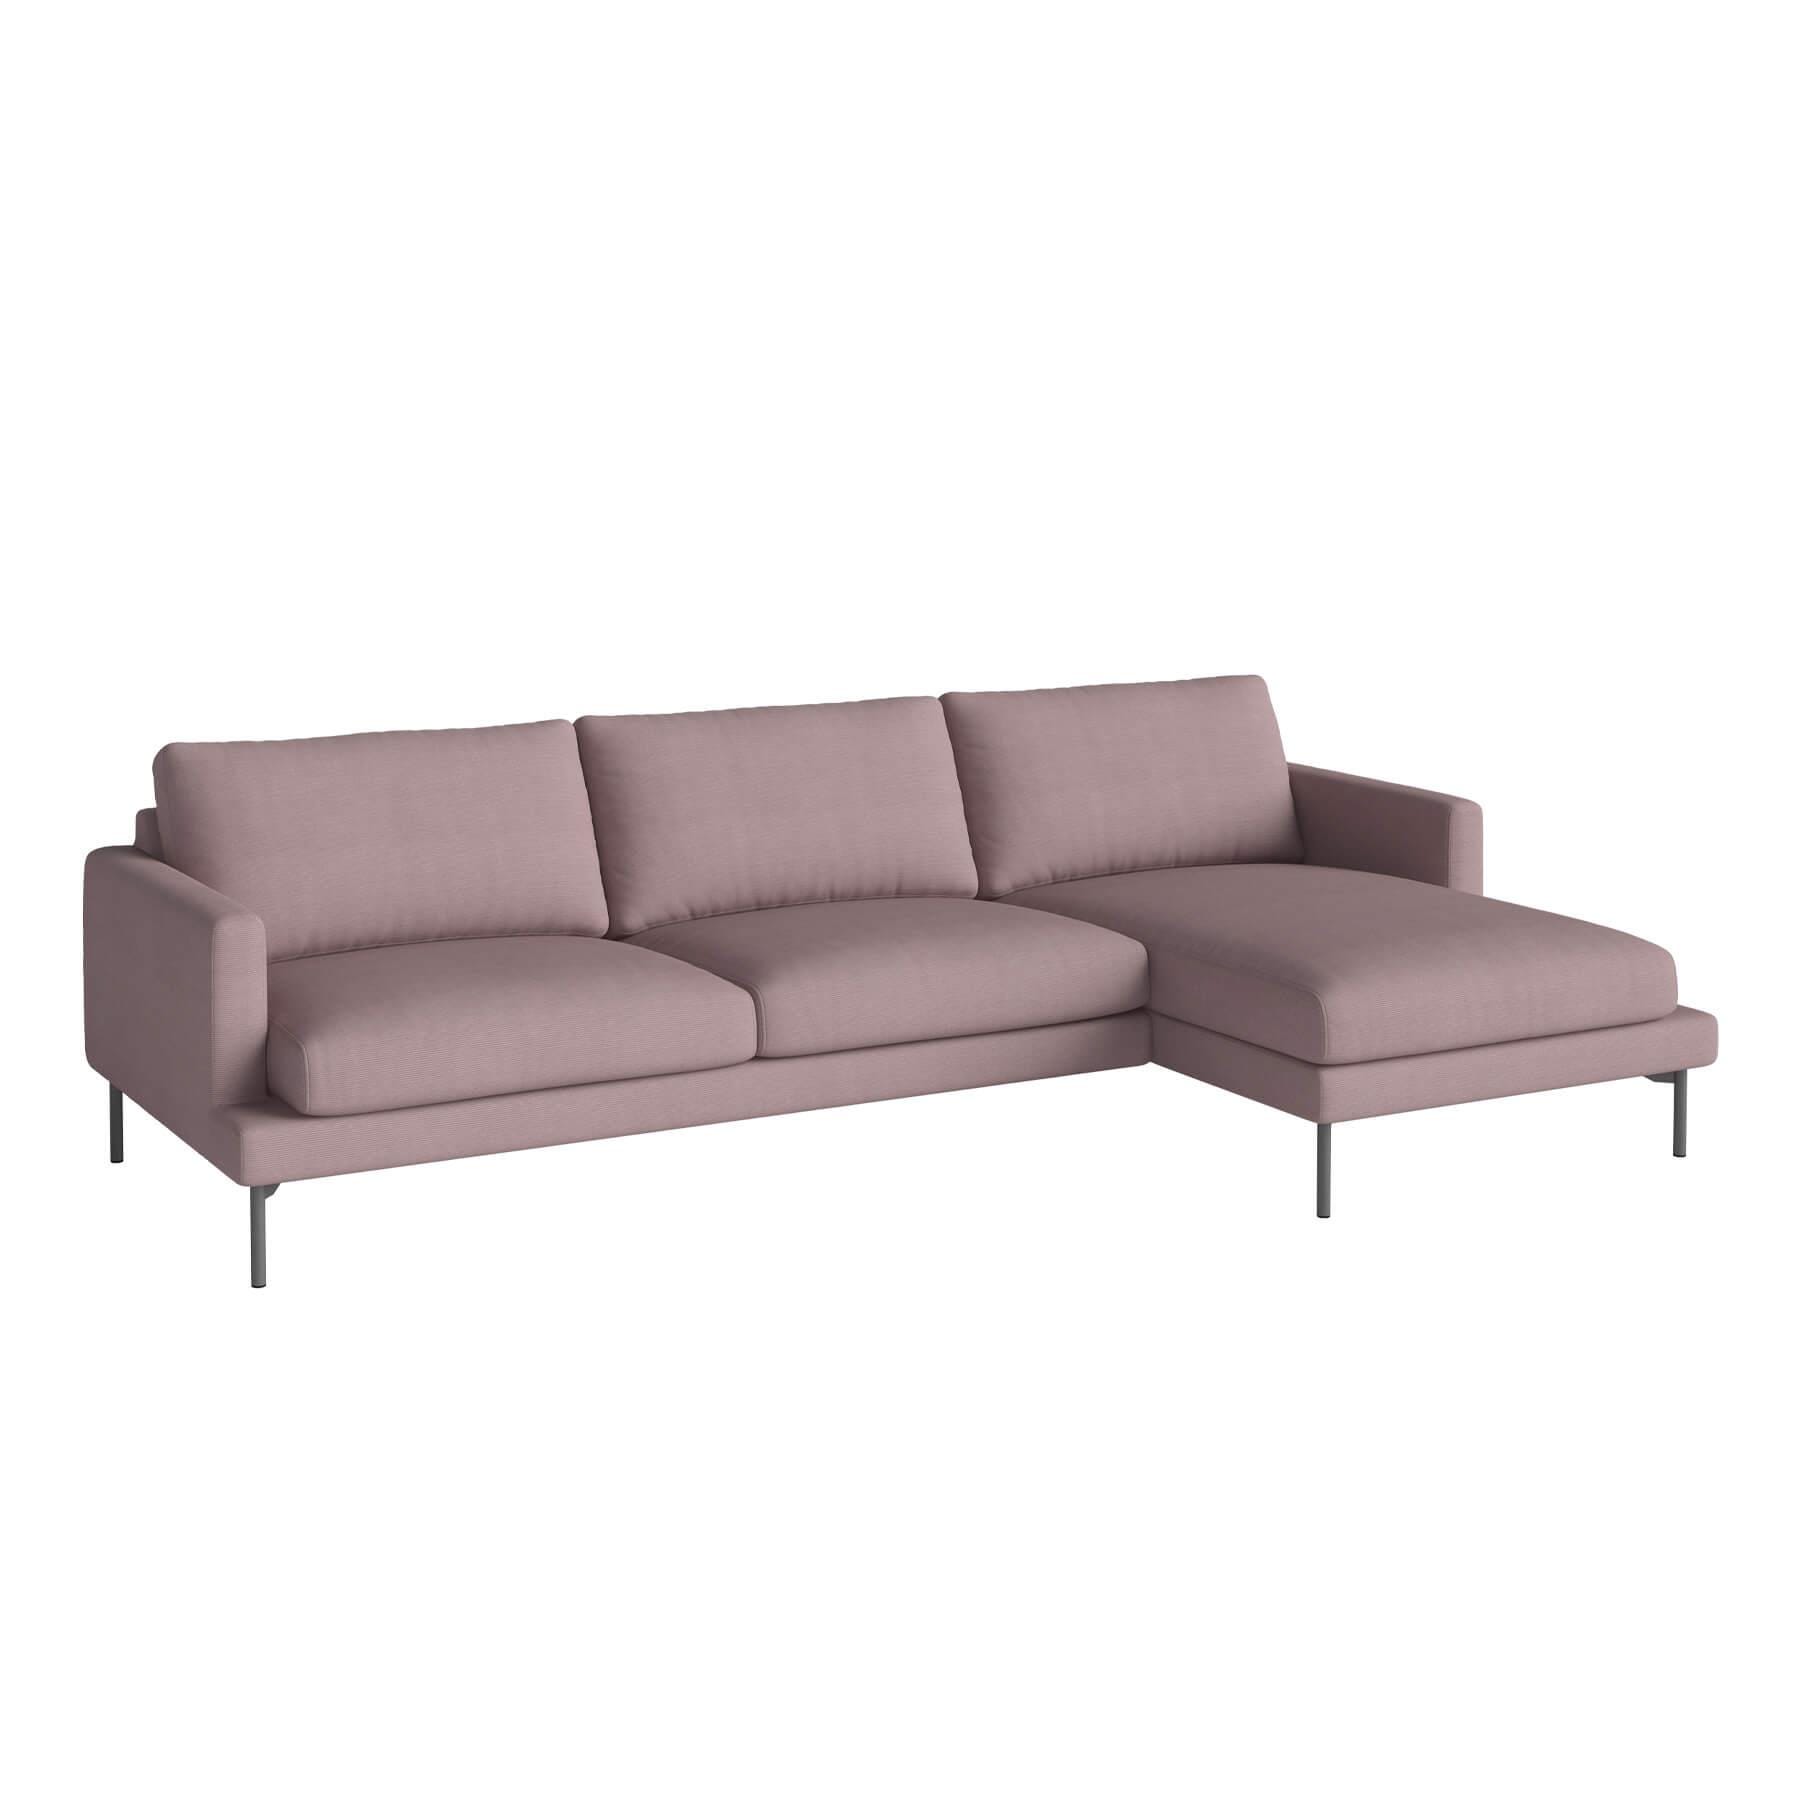 Bolia Veneda Sofa 35 Seater Sofa With Chaise Longue Grey Laquered Steel Linea Rosa Right Pink Designer Furniture From Holloways Of Ludlow